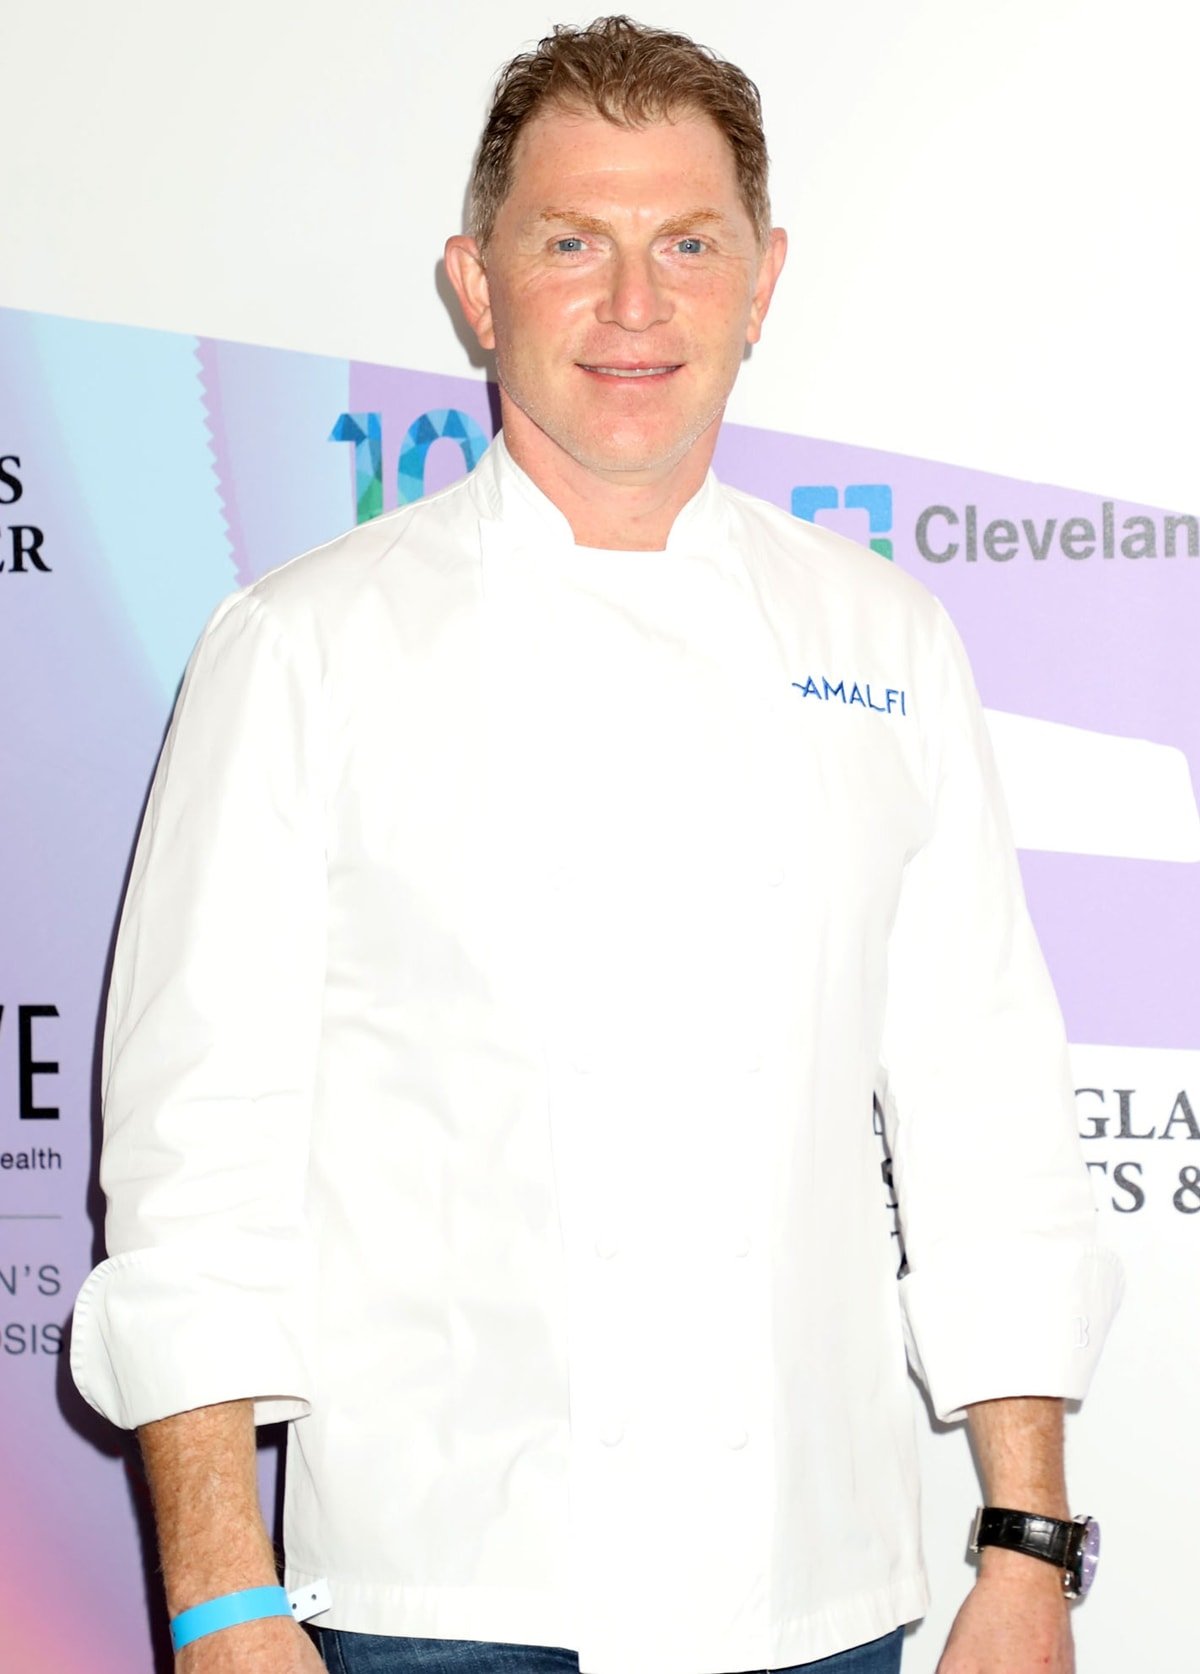 Bobby Flay has collaborated with the Food Network for several decades and is one of the world